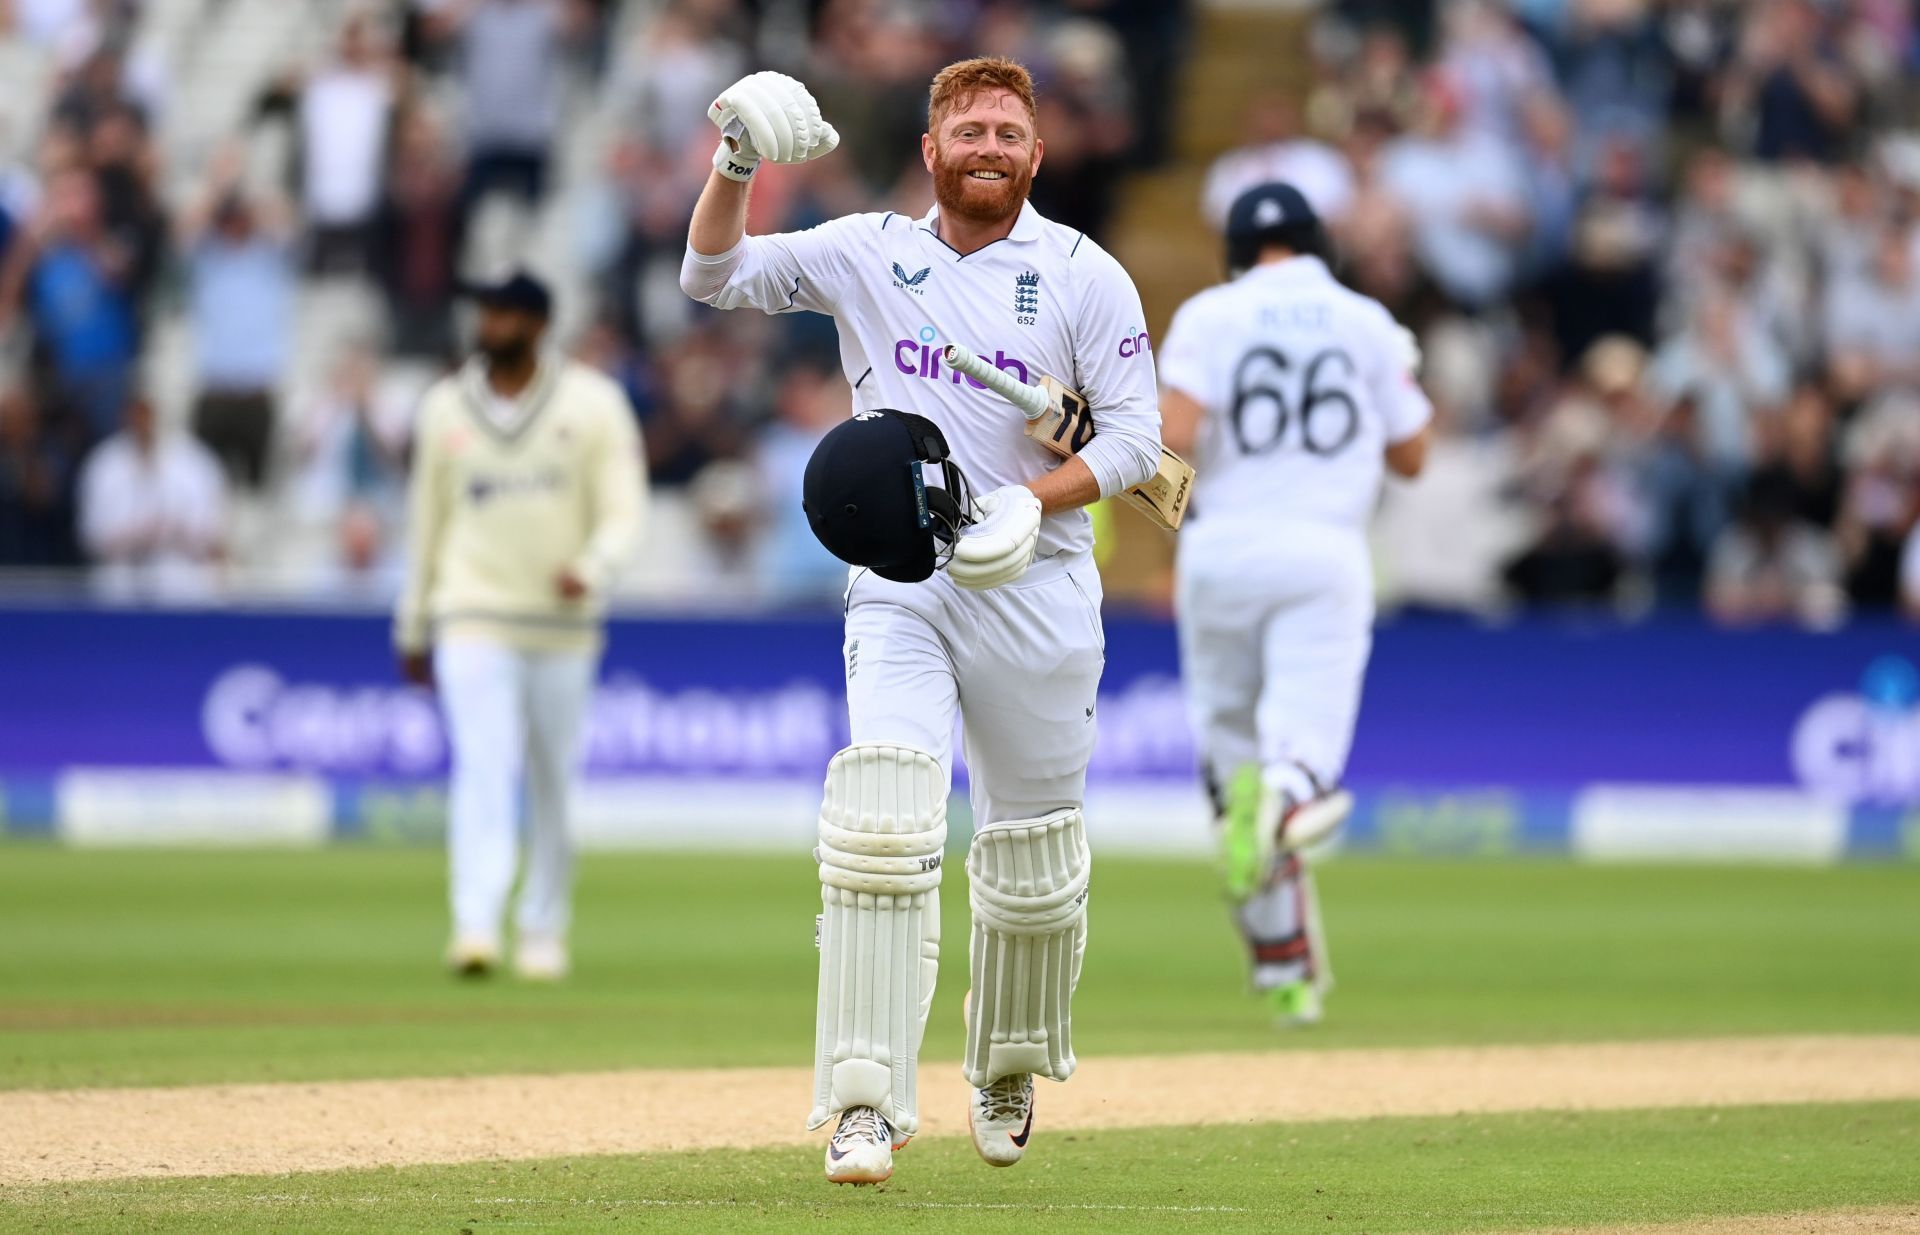 Jonny Bairstow scored two centuries for the home team in this Test match